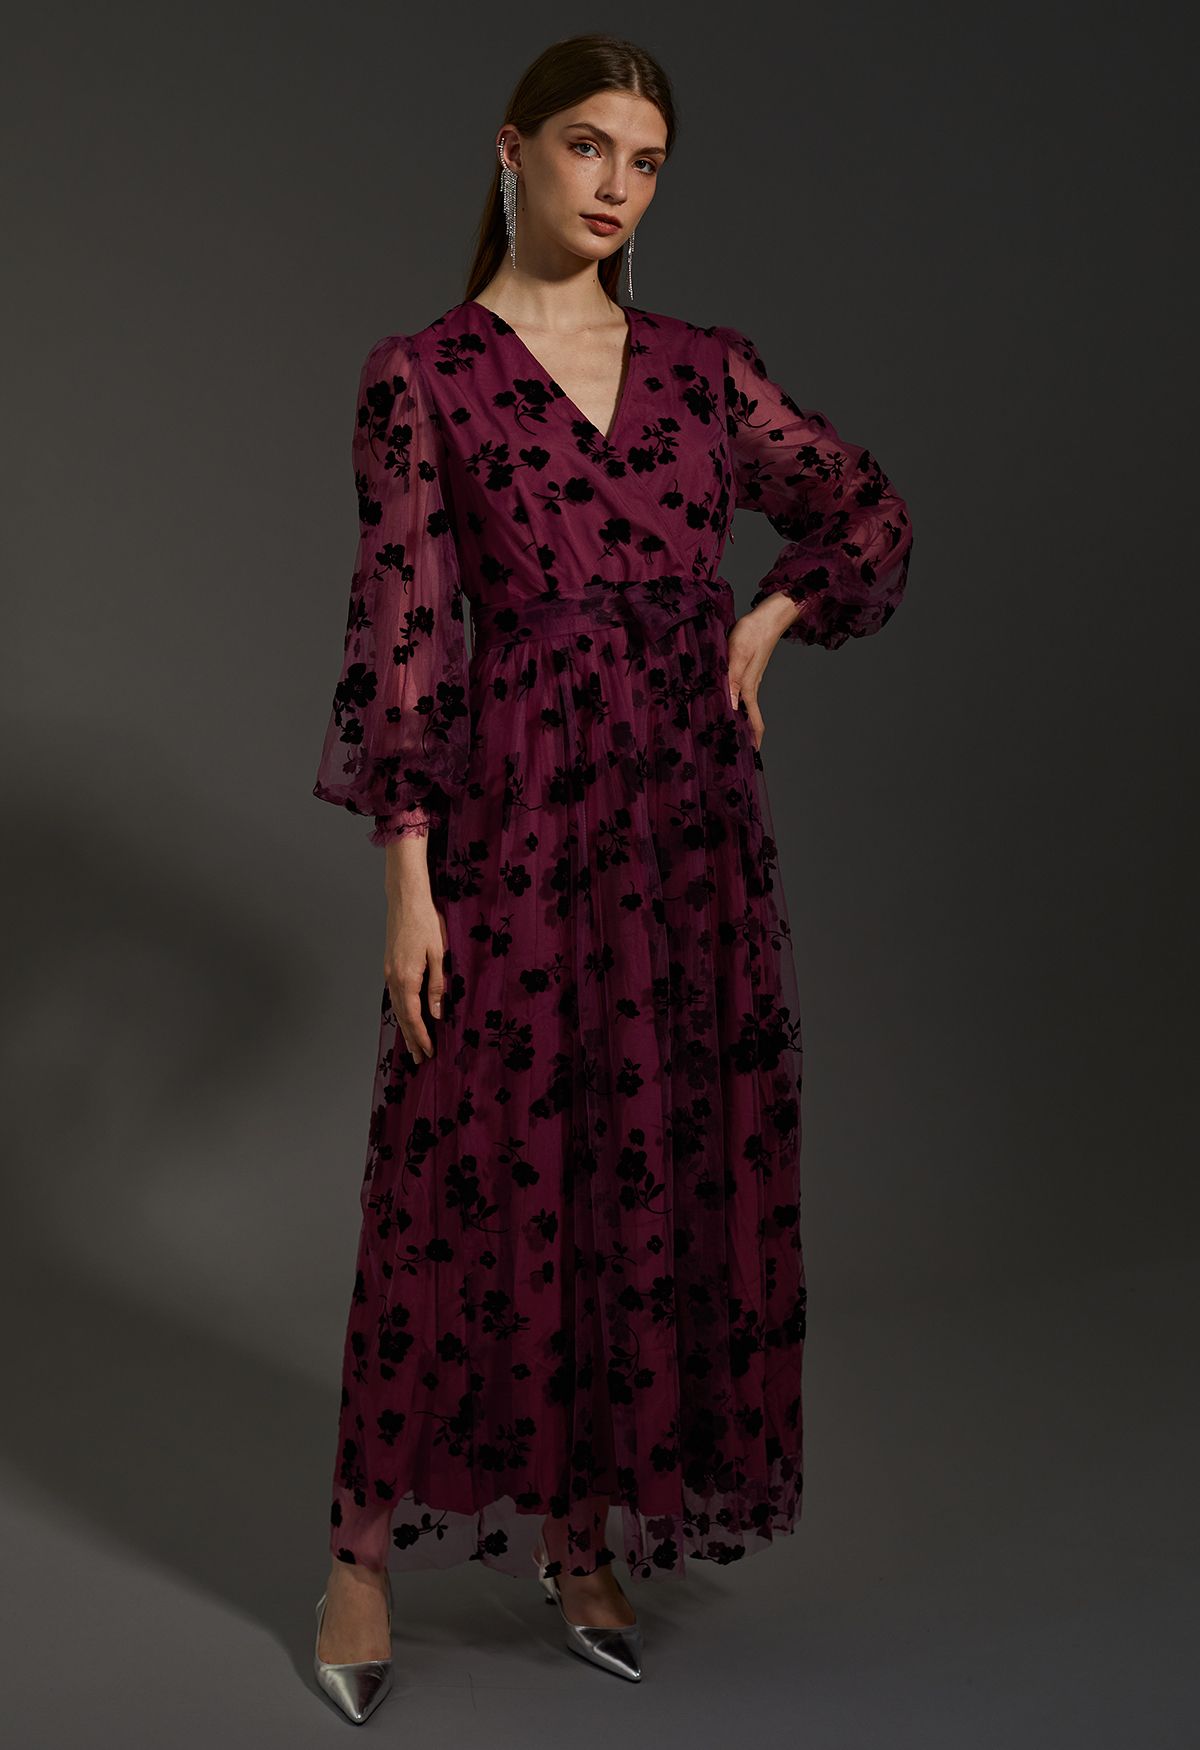 3D Wrap Maxi in Burgundy - Retro, Indie and Unique Fashion